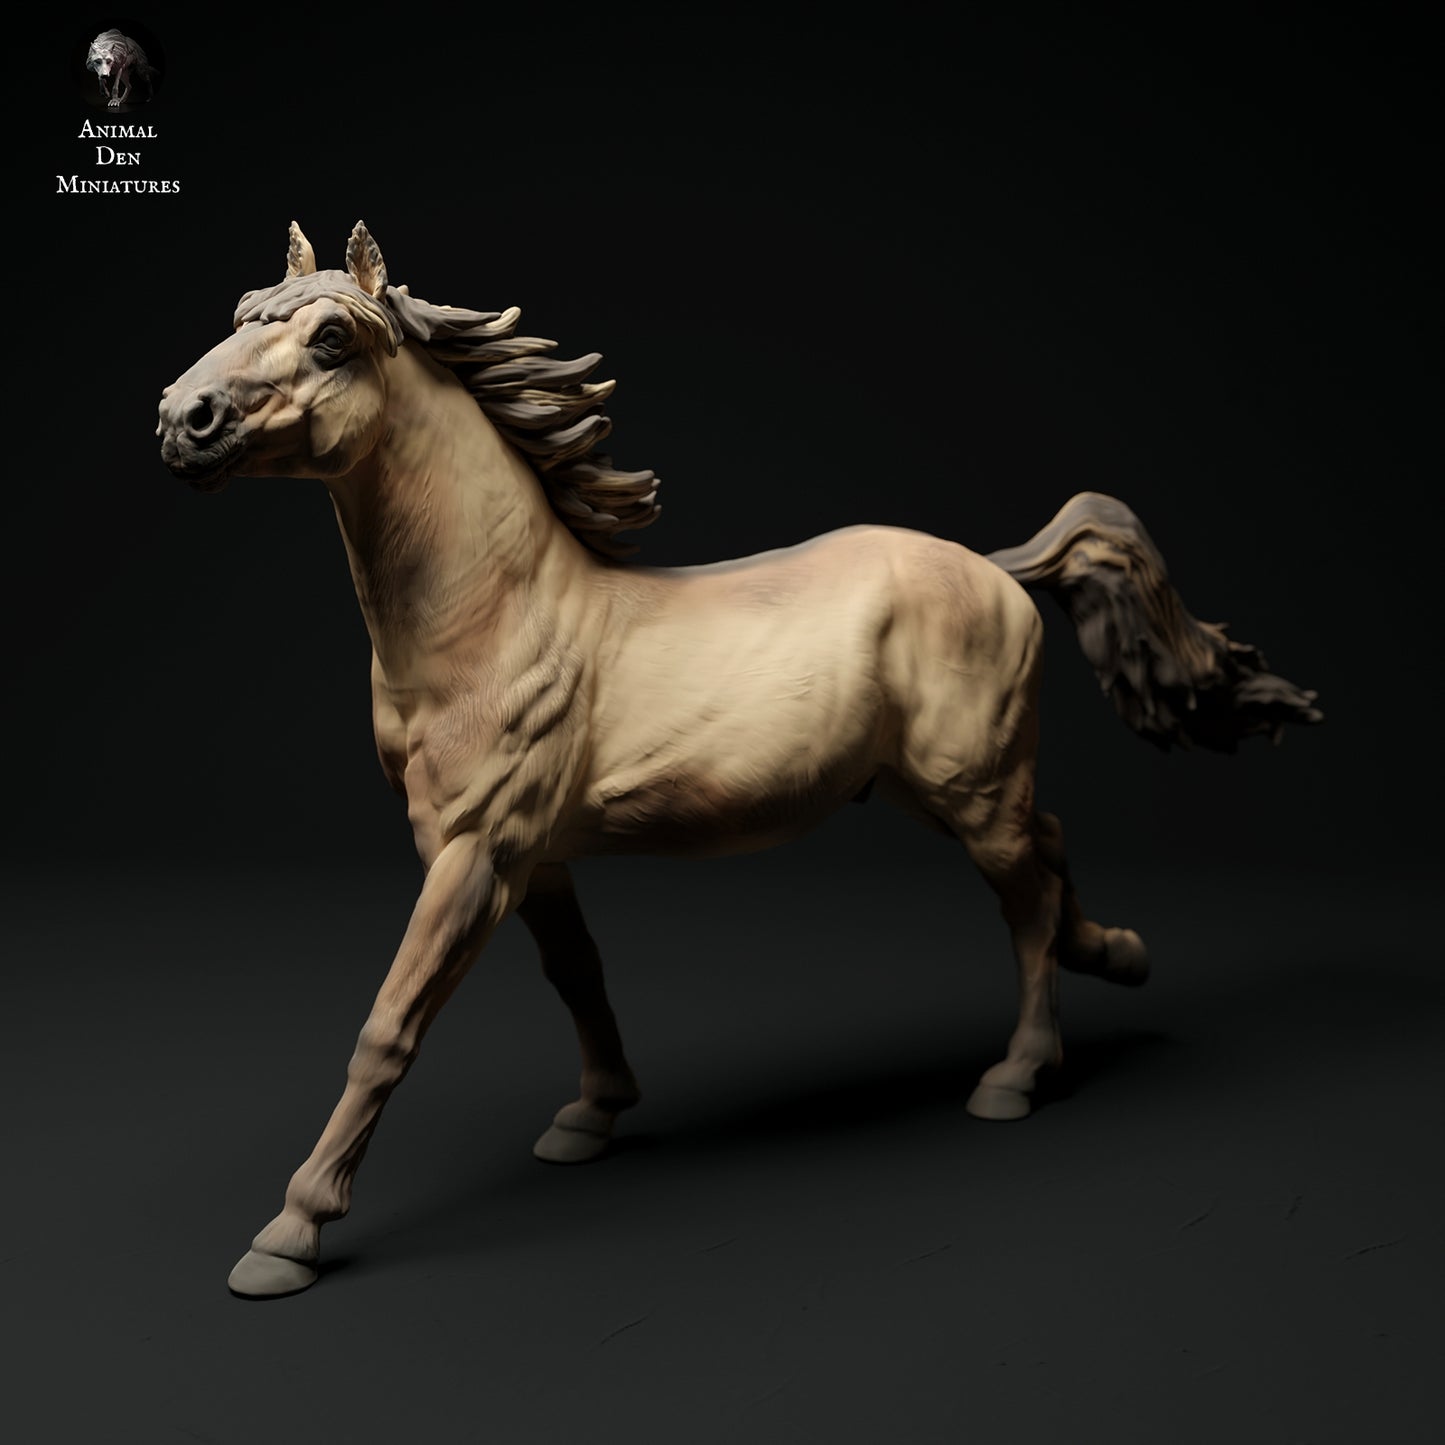 Cantering konik horse - white resin - ready to prep / paint - many options